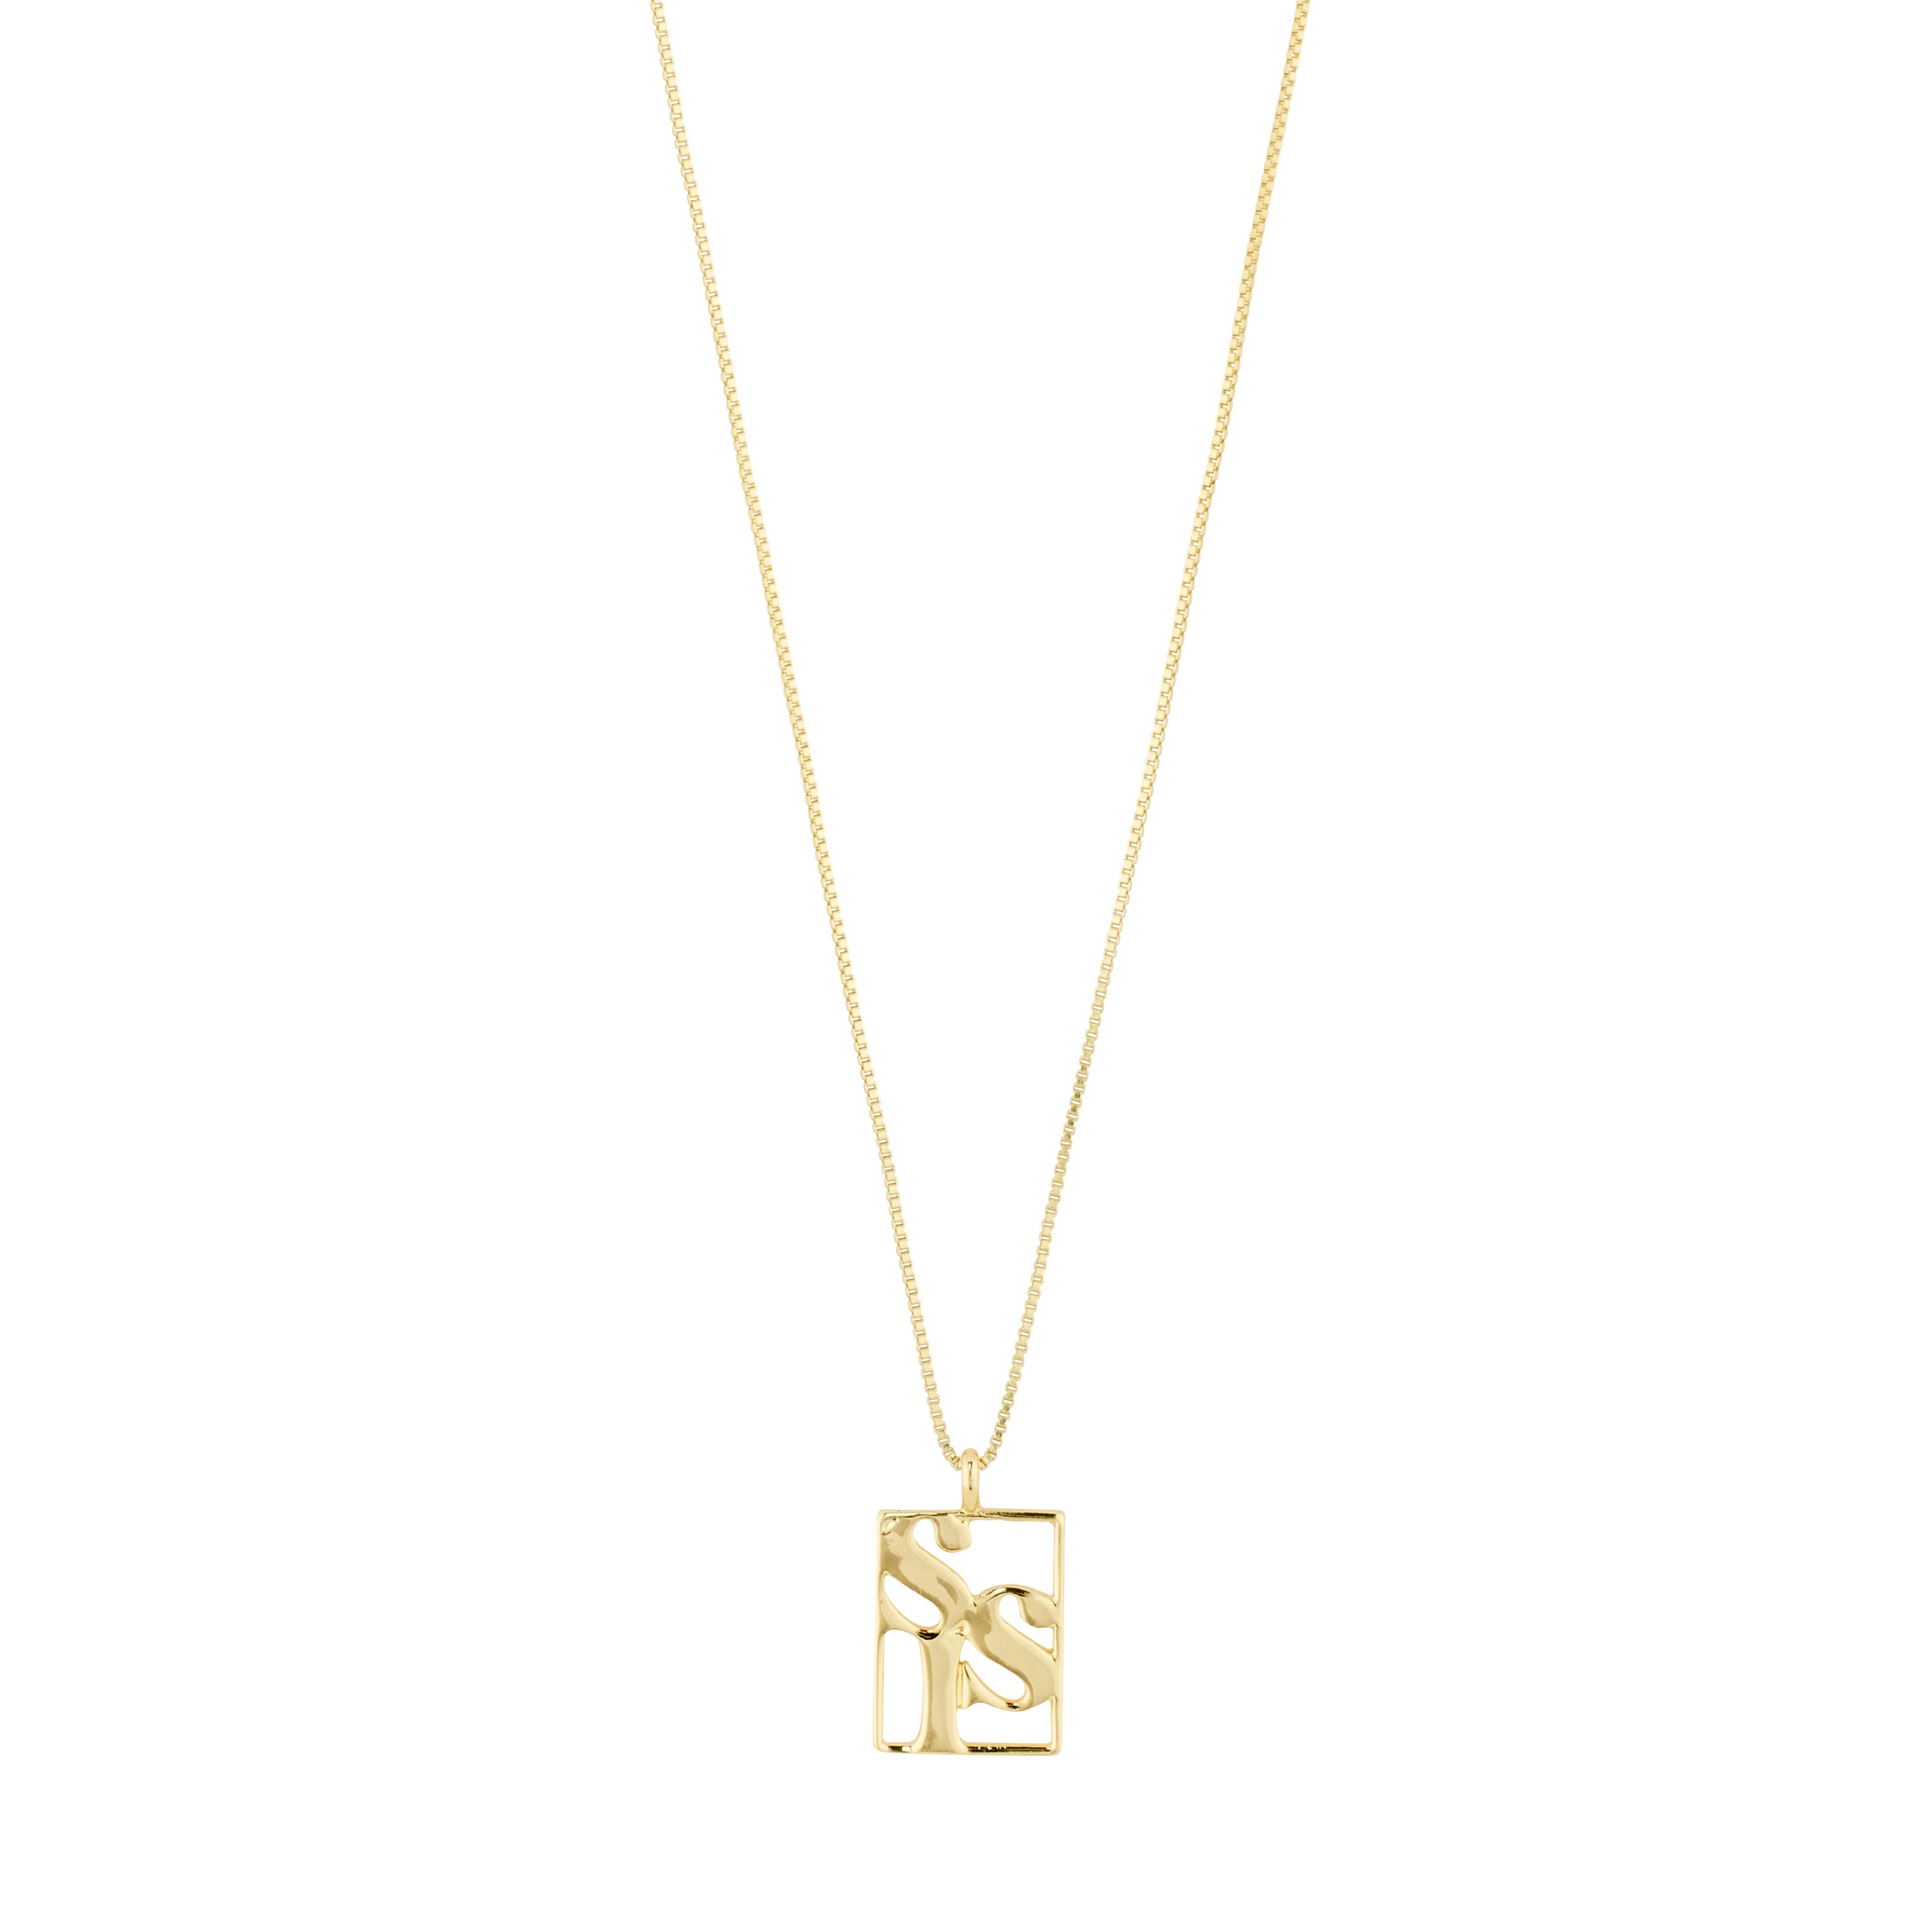 LOVE TAG, recycled SIS necklace gold-plated